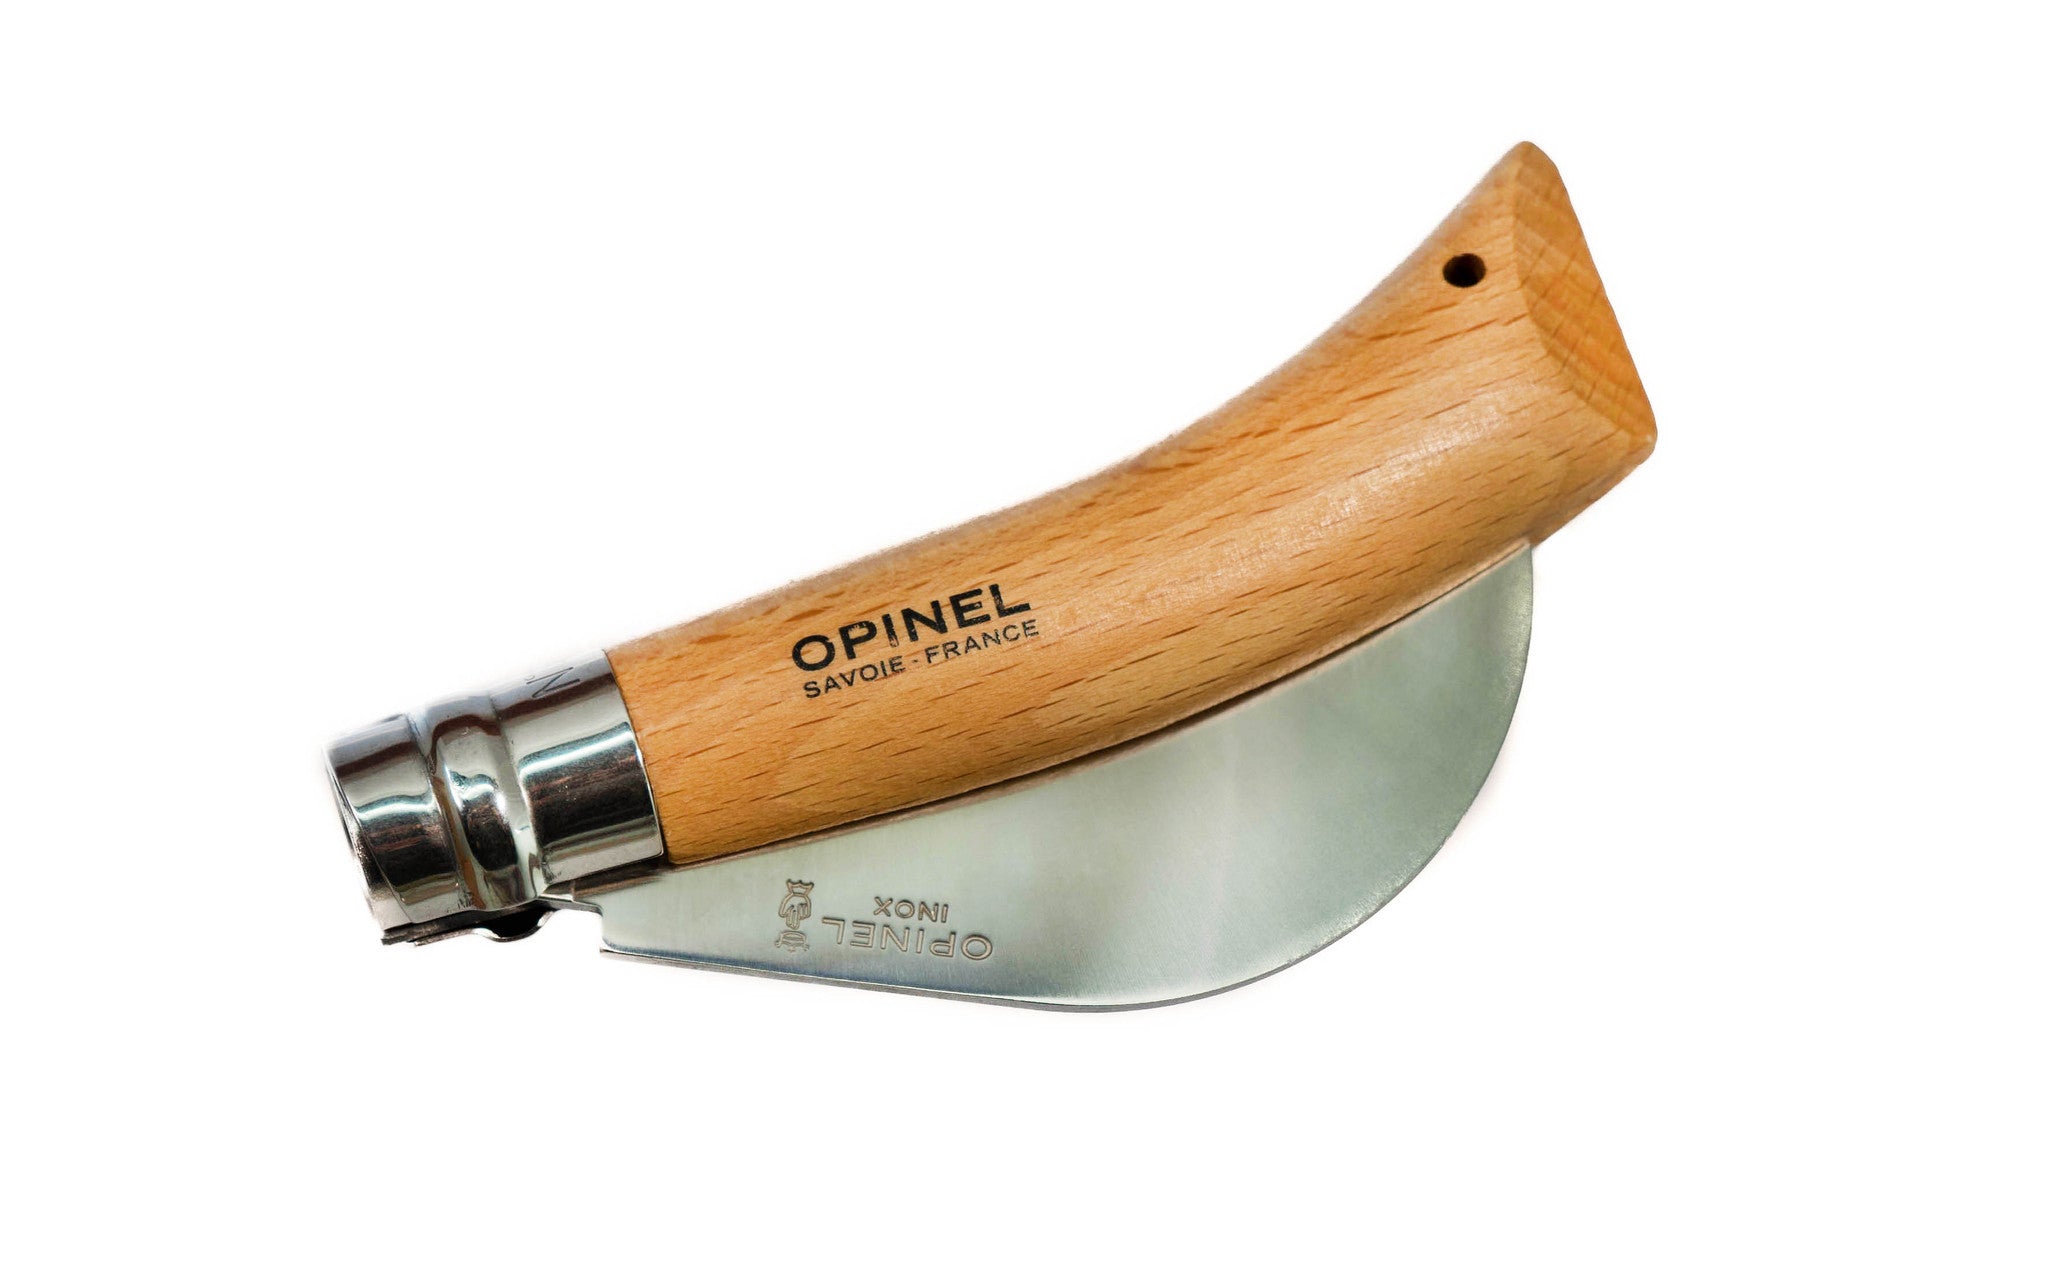 Opinel Stainless Steel No. 10 Pruning Knife ~ Folded Position & Locked